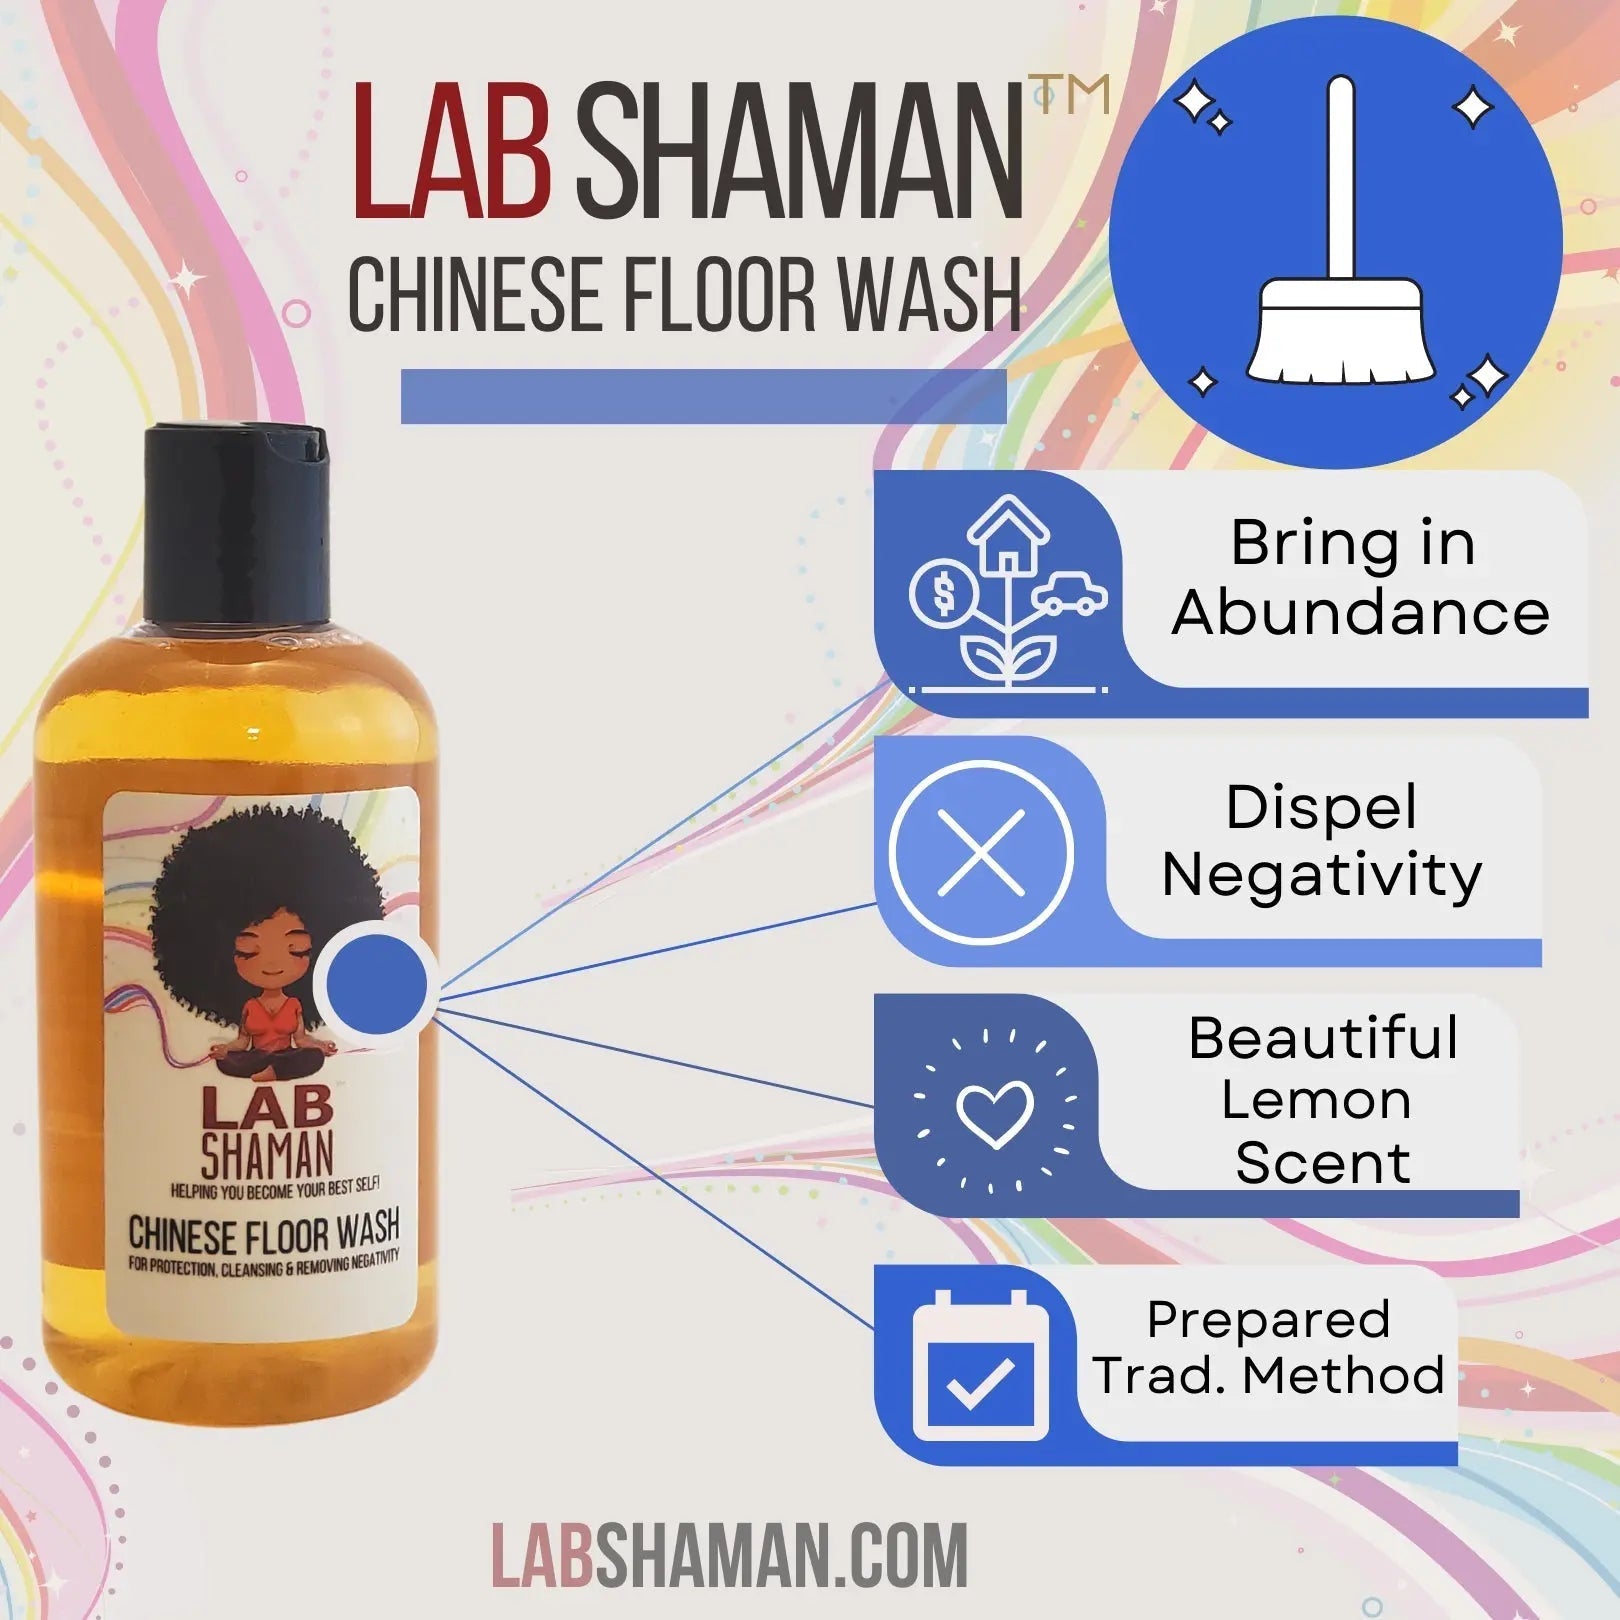  Chinese Floor Wash | Hoodoo Tradition Protection & Cleanse  | LAB Shaman by LABShaman sold by LABShaman